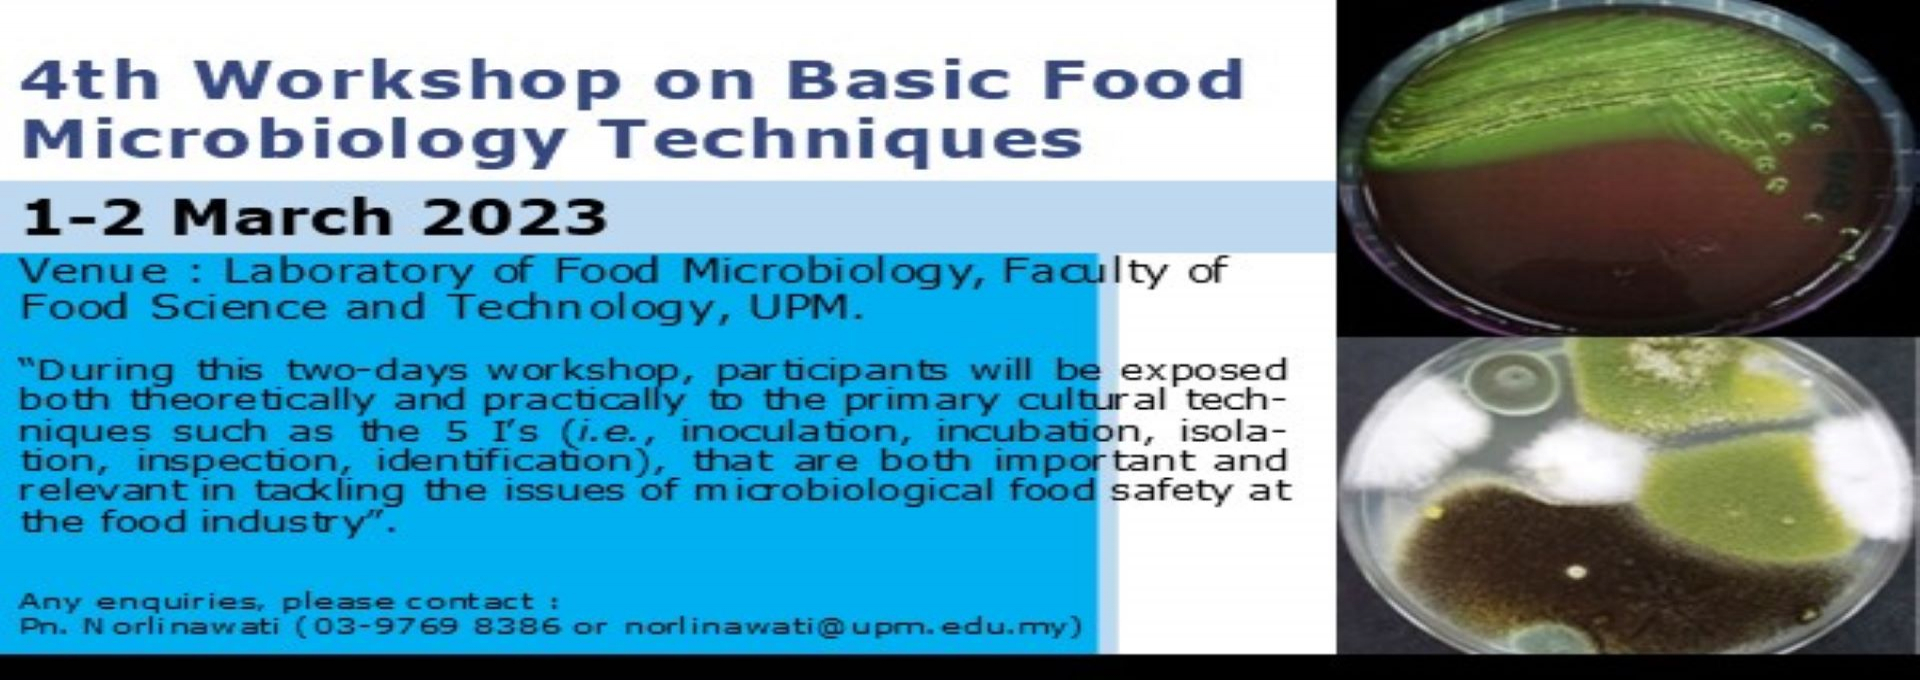 4TH WORKSHOP ON BASIC FOOD MICROBIOLOGY TECHNIQUES